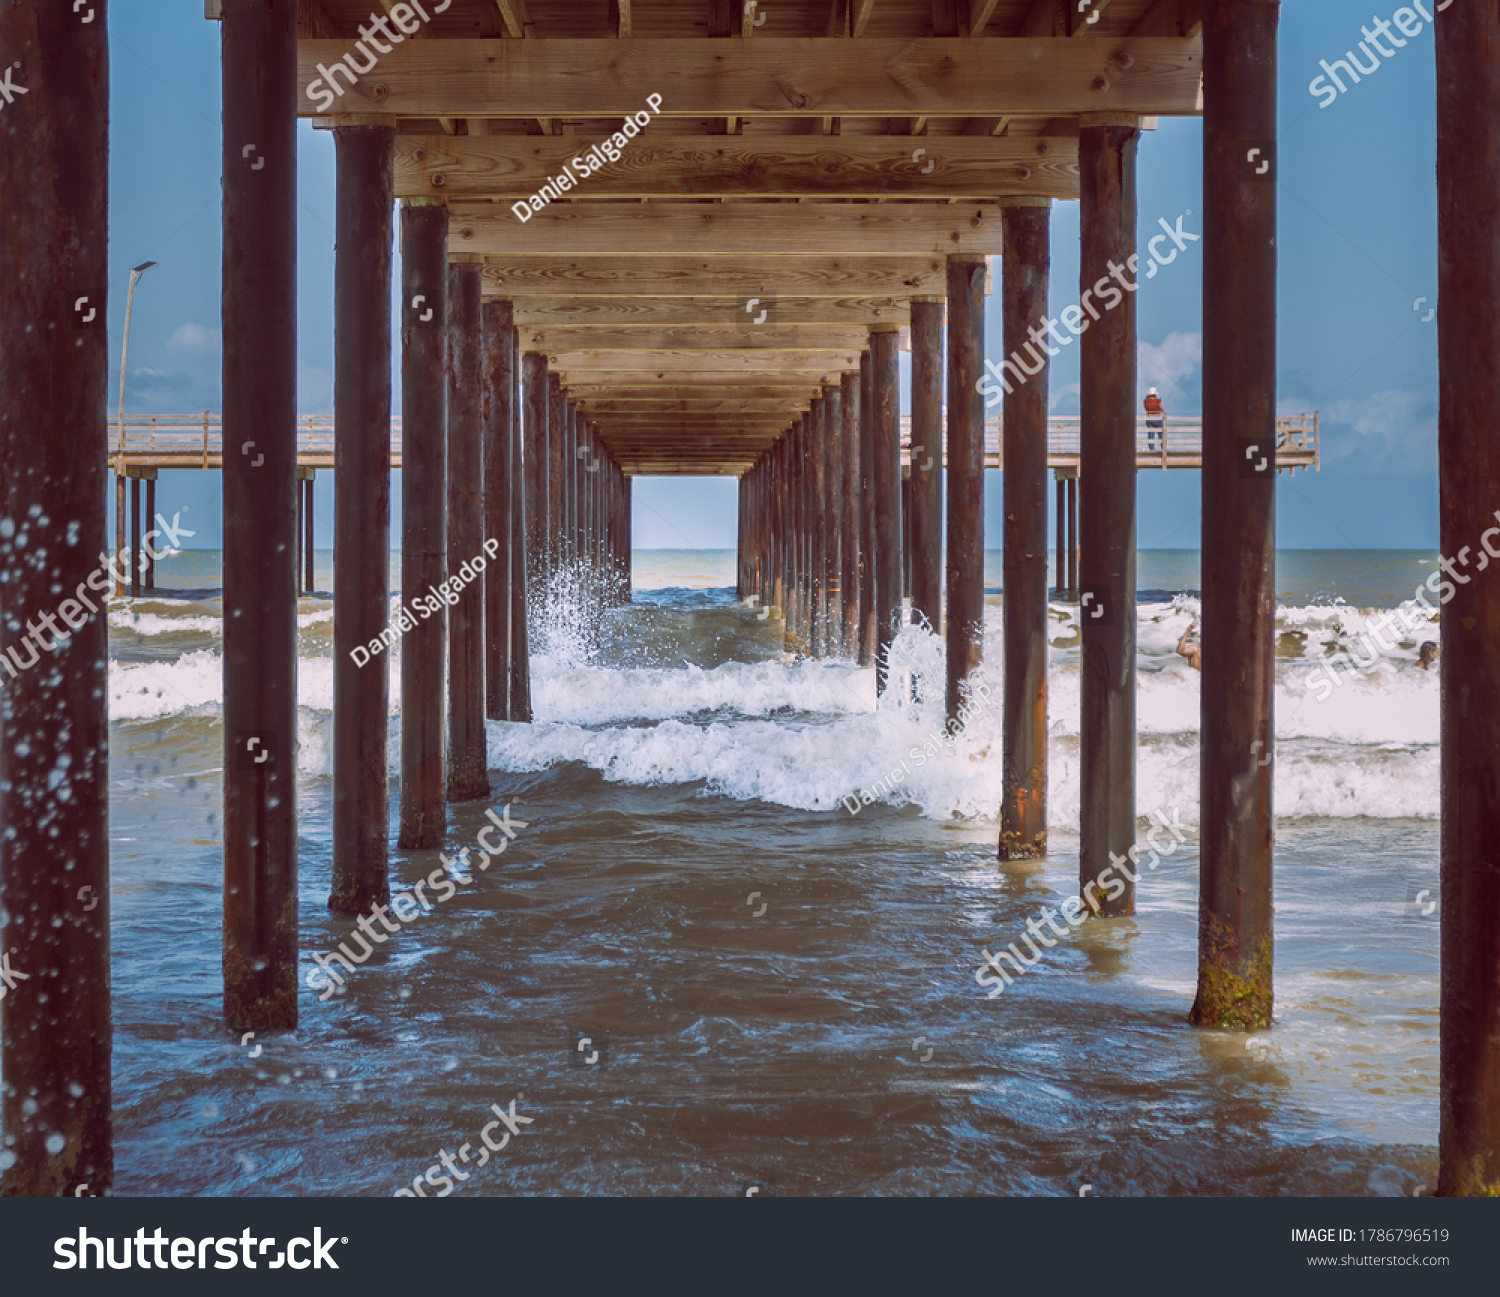 waves under the wooden pier on a clear day
 #1786796519